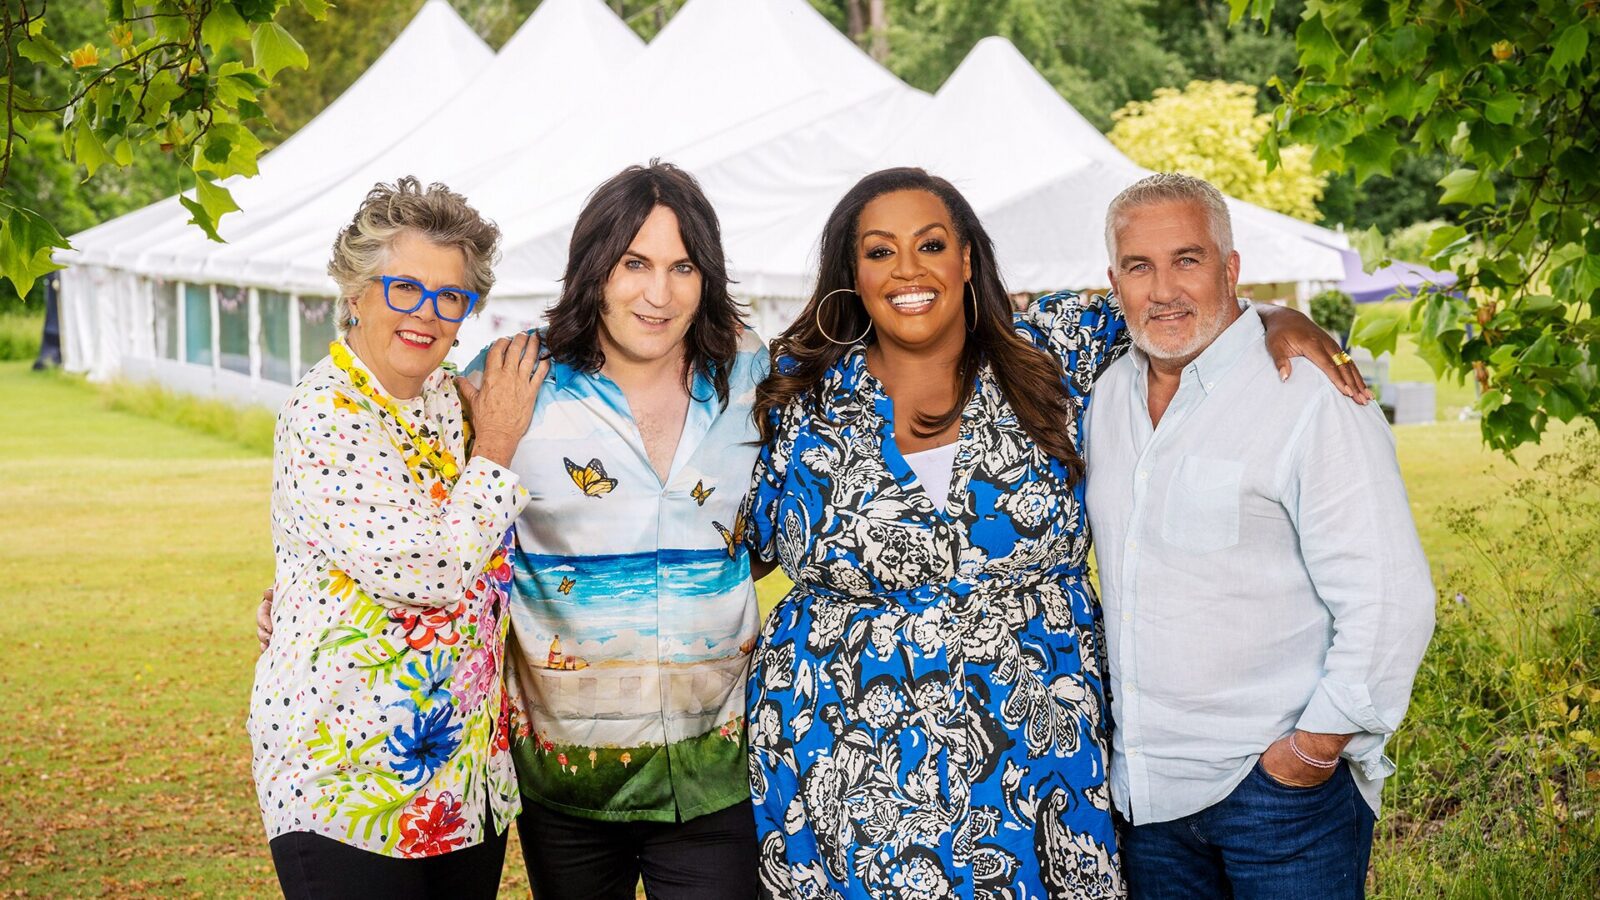 GBBO gets a Deaf baker - 4 hosts of the Great British Bake Off standing close together smiling at the camera in front of a white tent in the countryside.